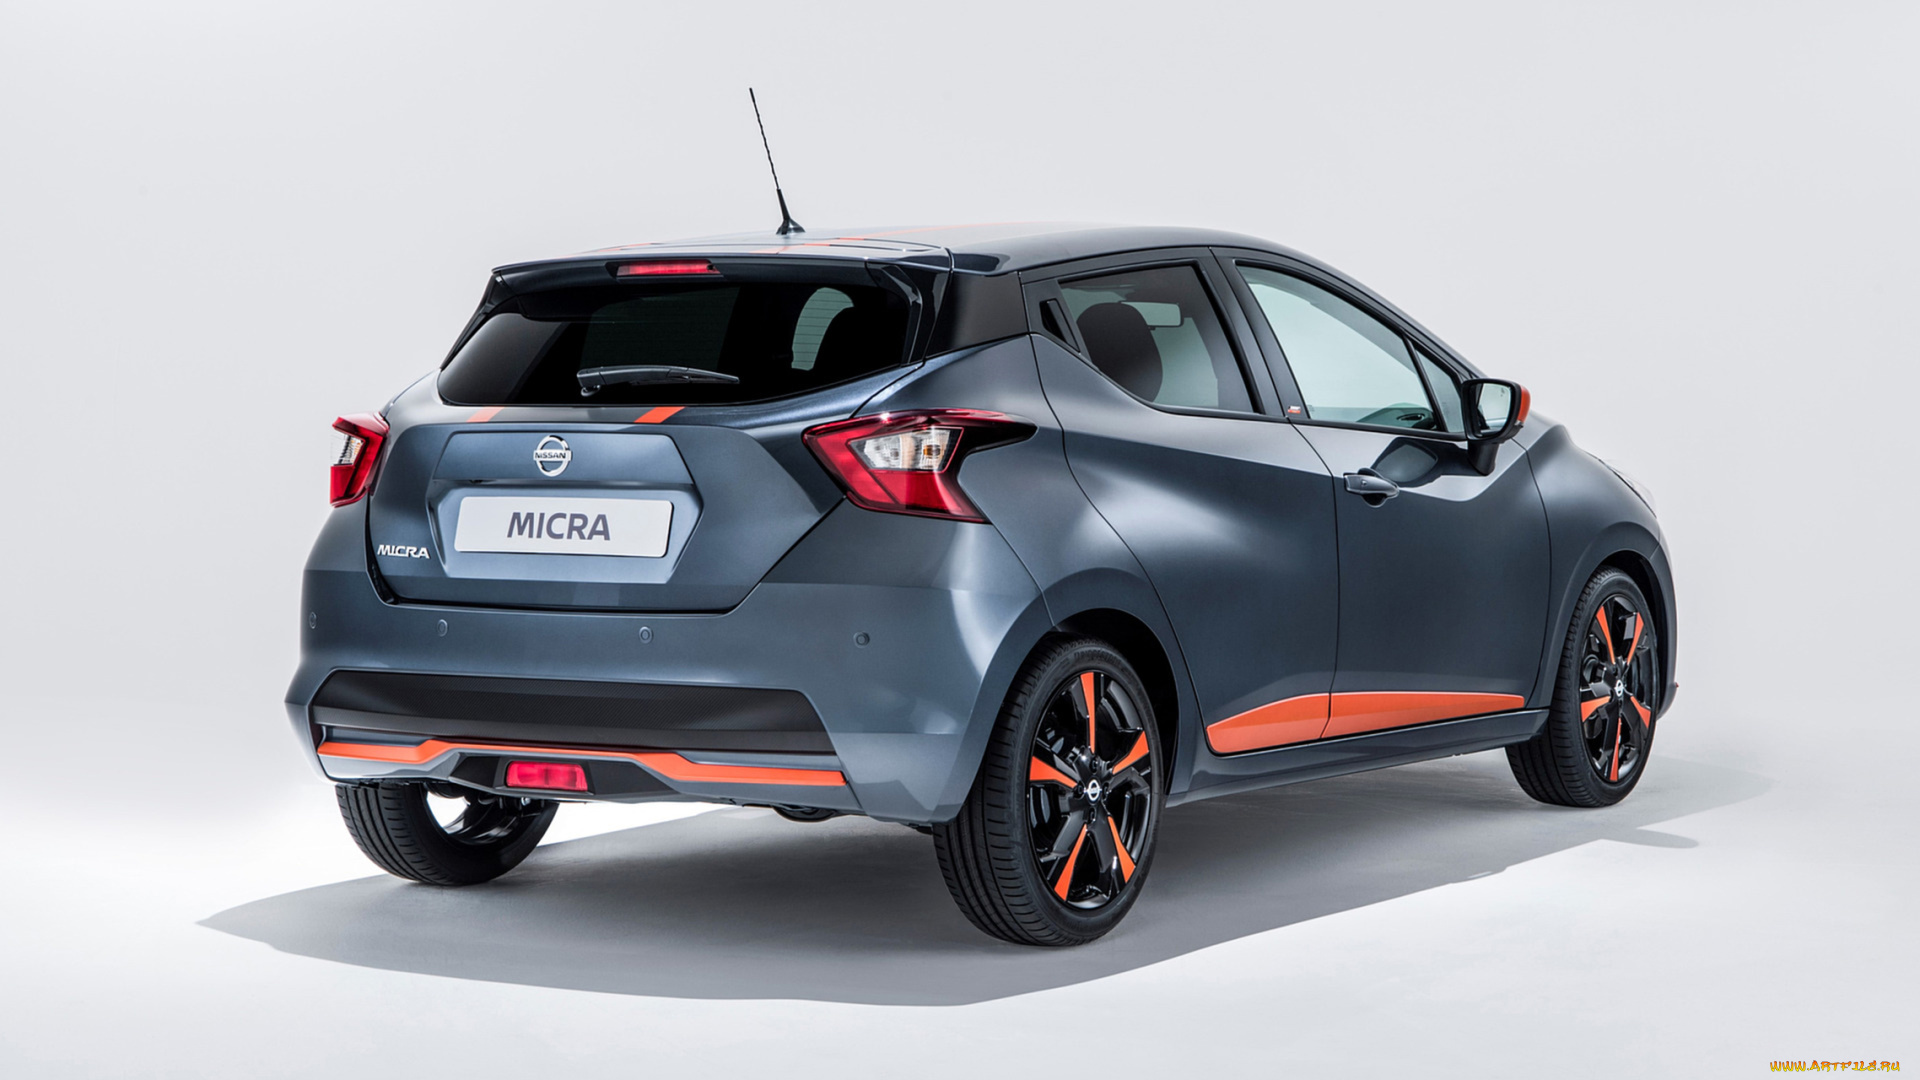 nissan, micra, bose, personal, edition, 2017, автомобили, nissan, datsun, 2017, micra, edition, personal, bose